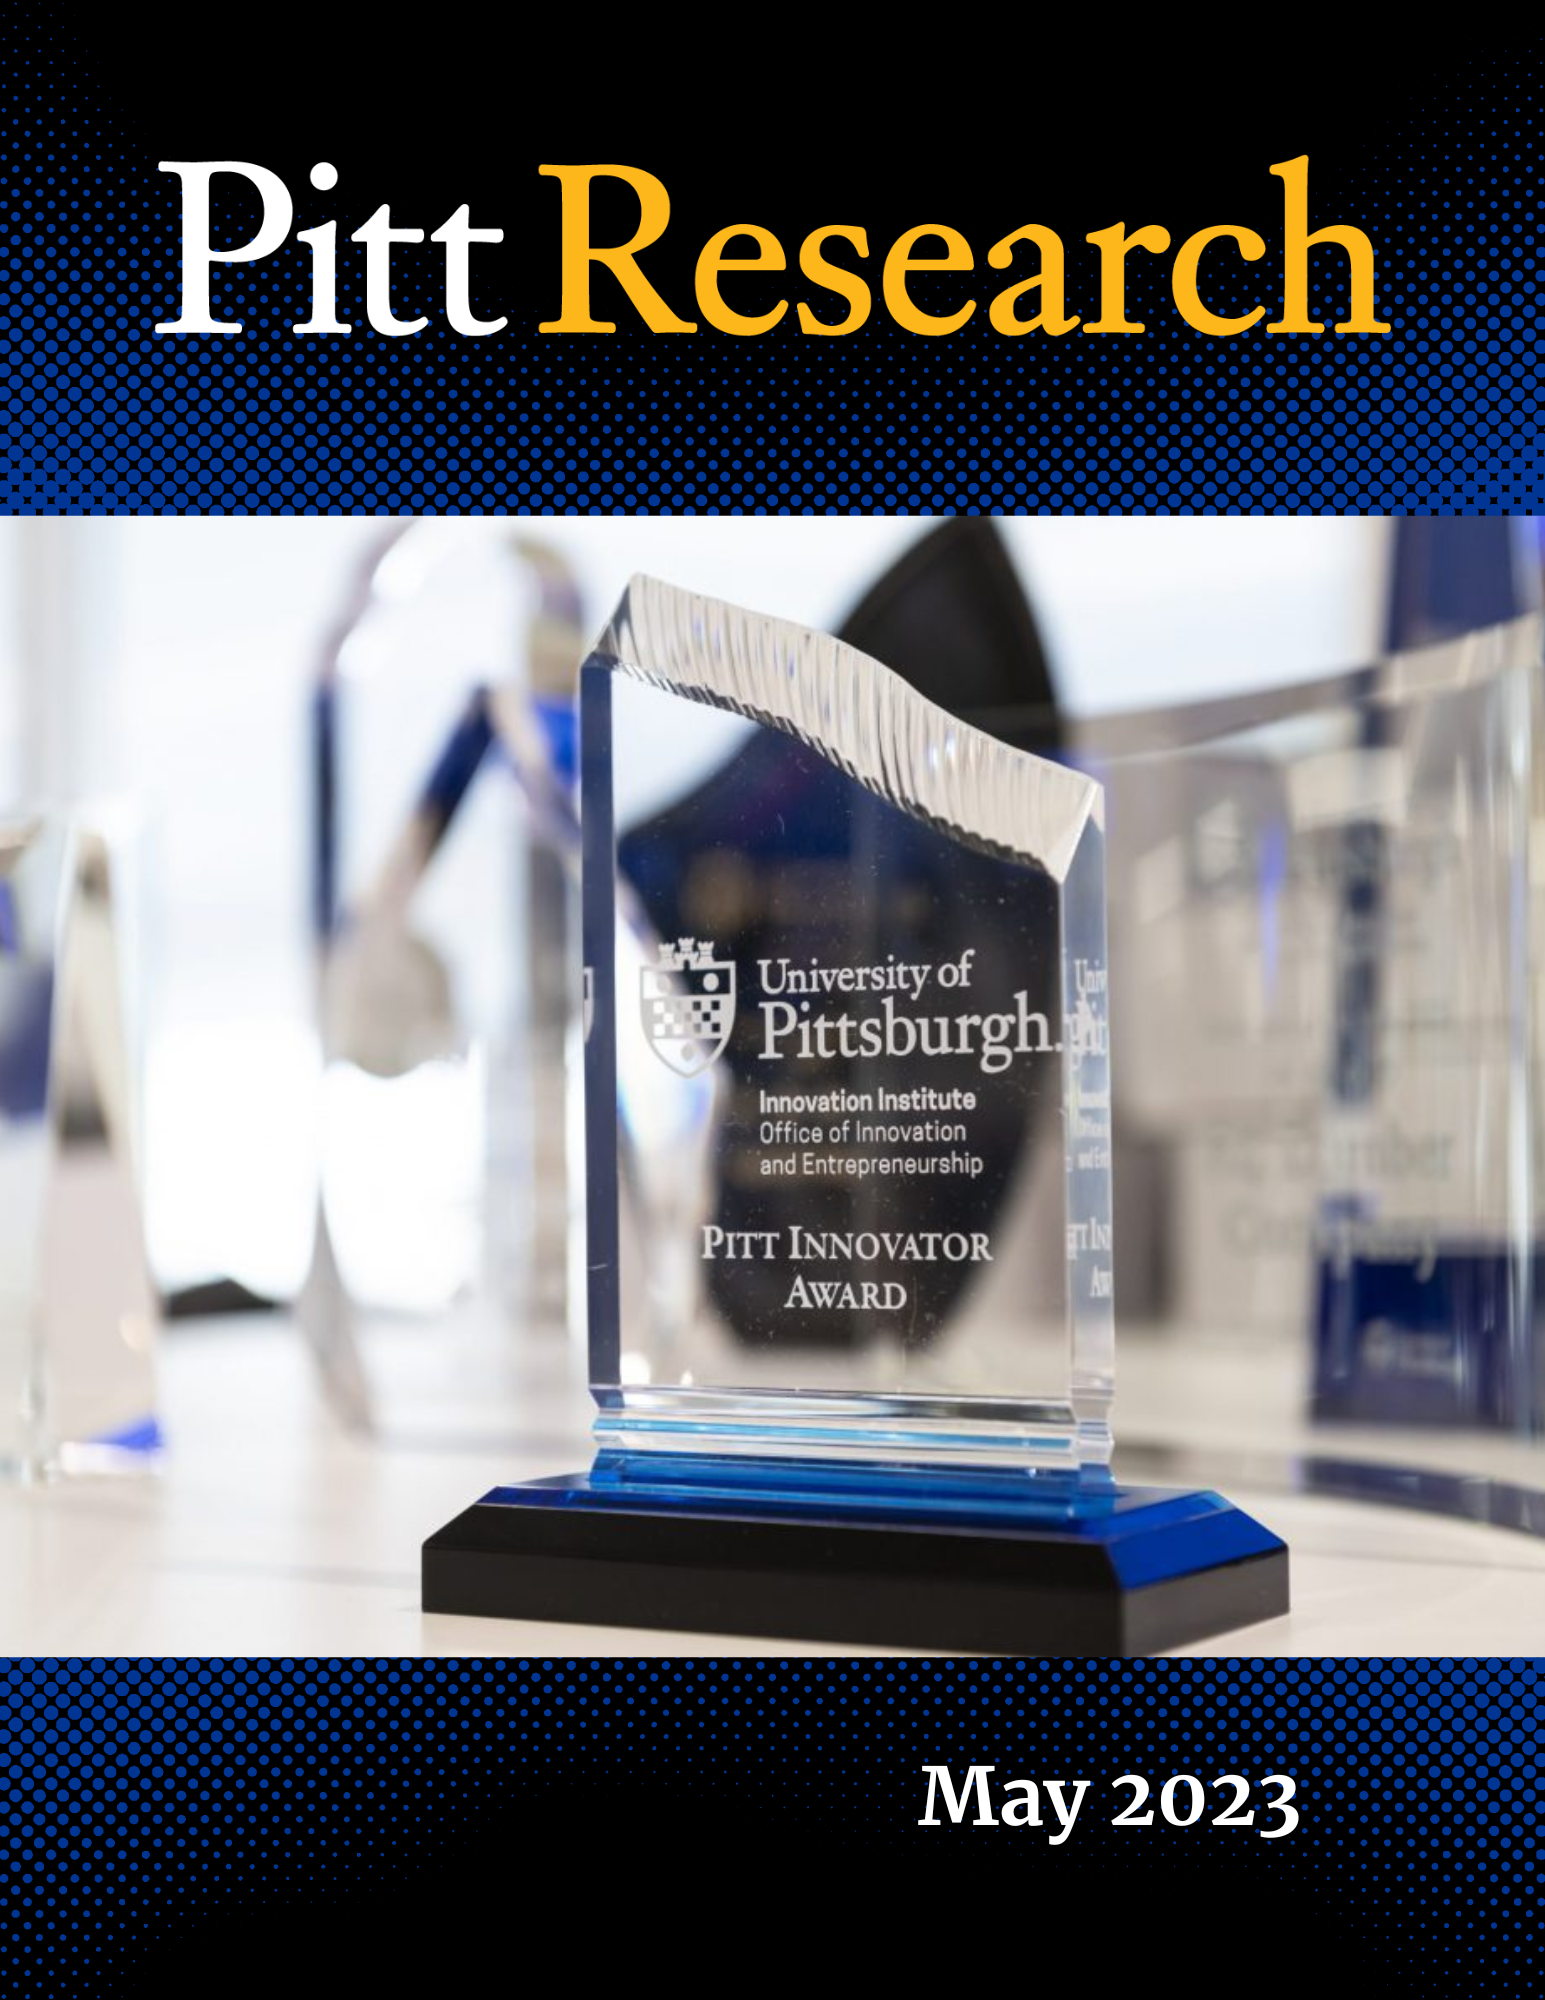 Pitt Research Newsletter for May 2023